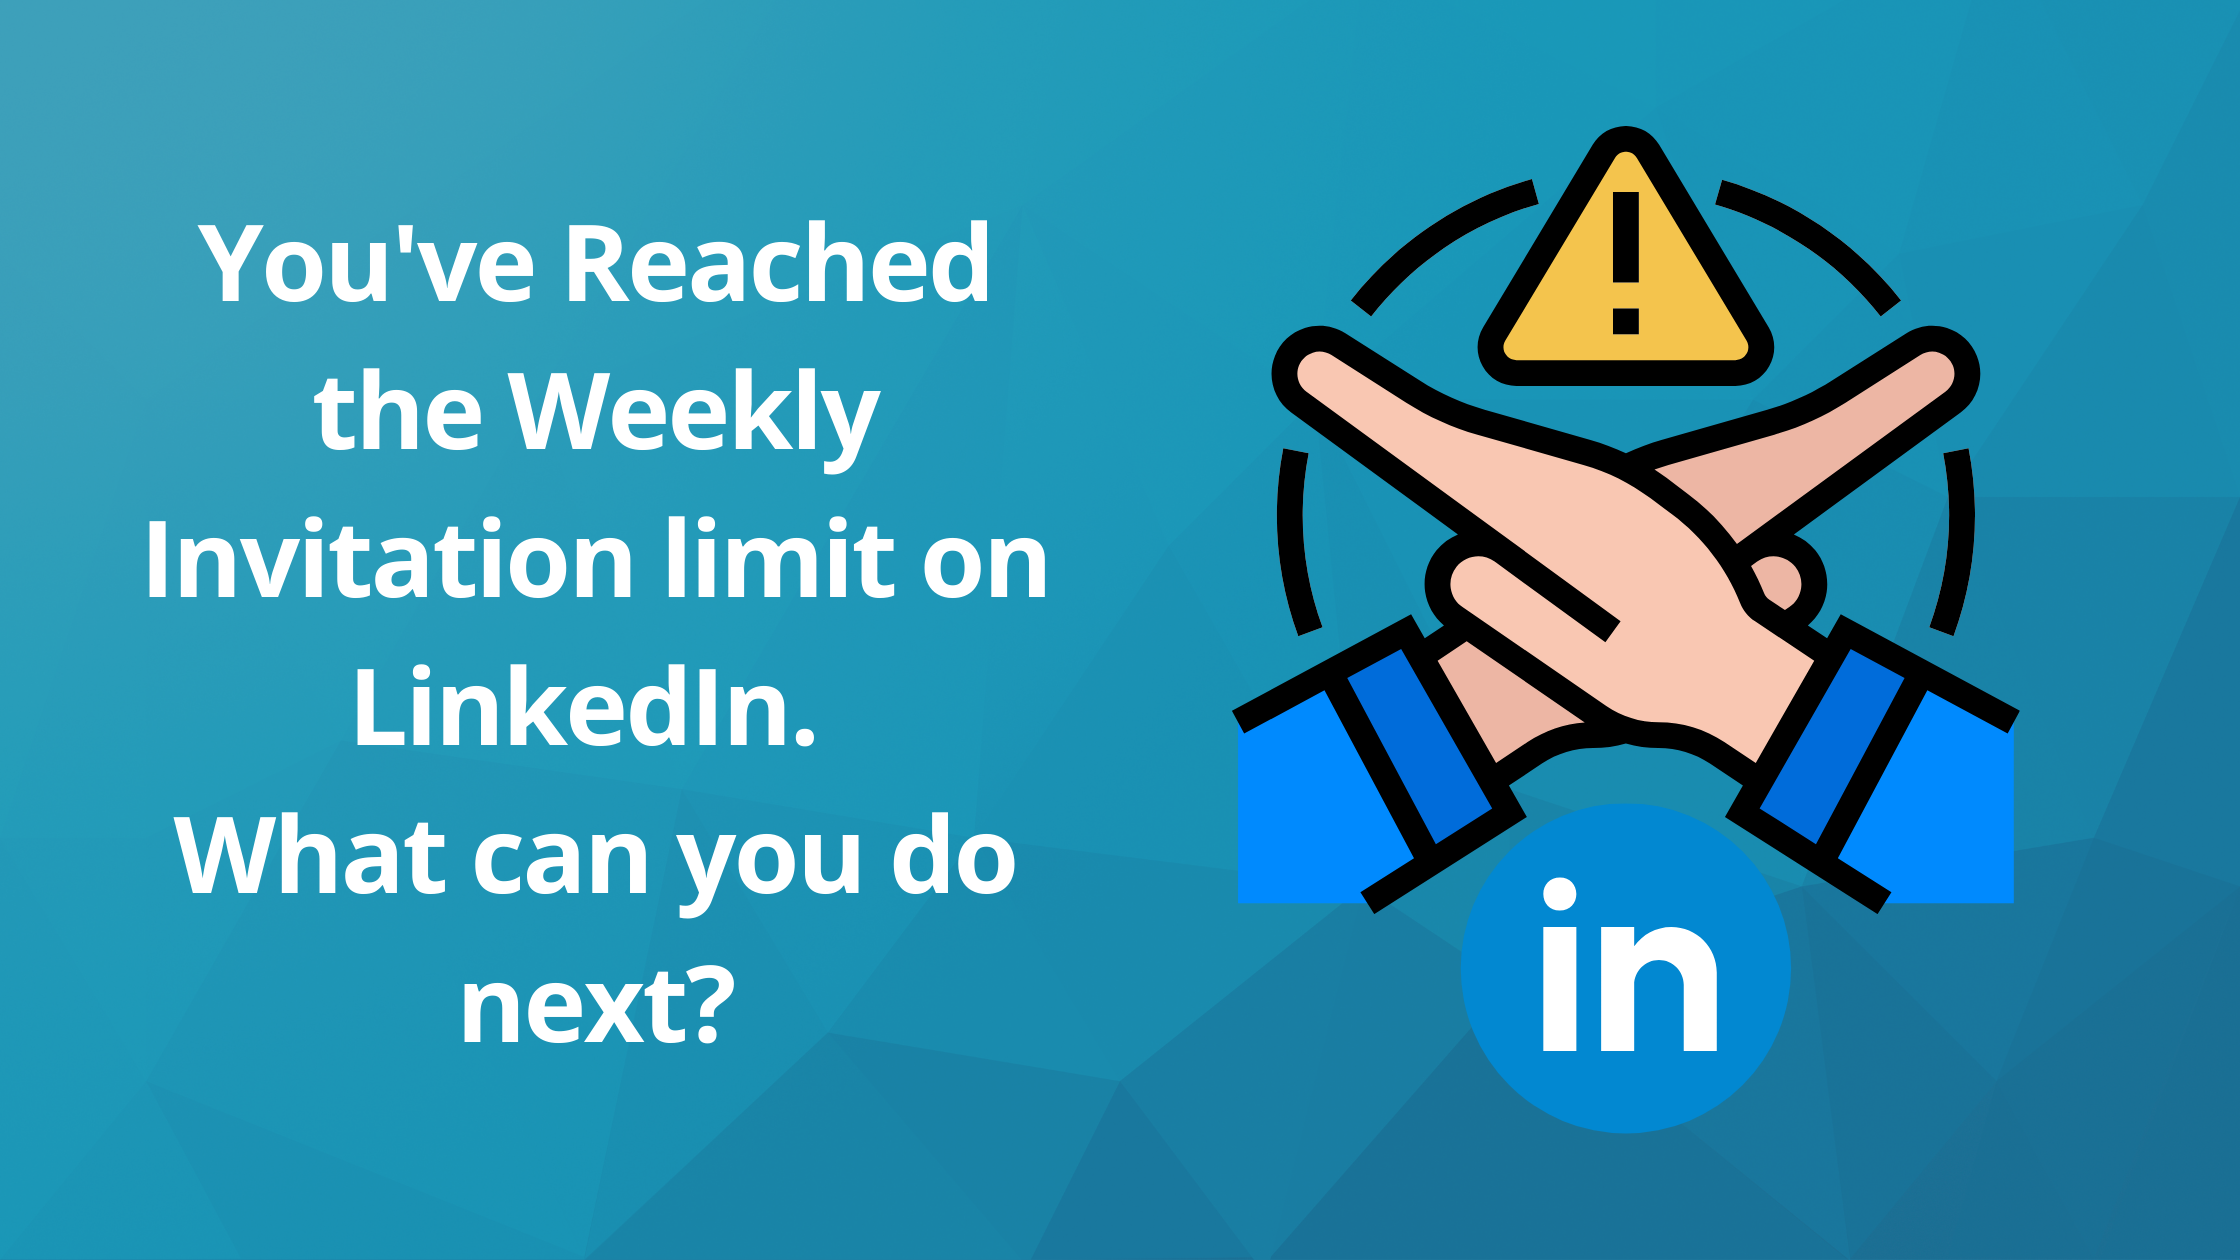 You've Reached the Weekly Invitation Limit on LinkedIn. What can you do next?